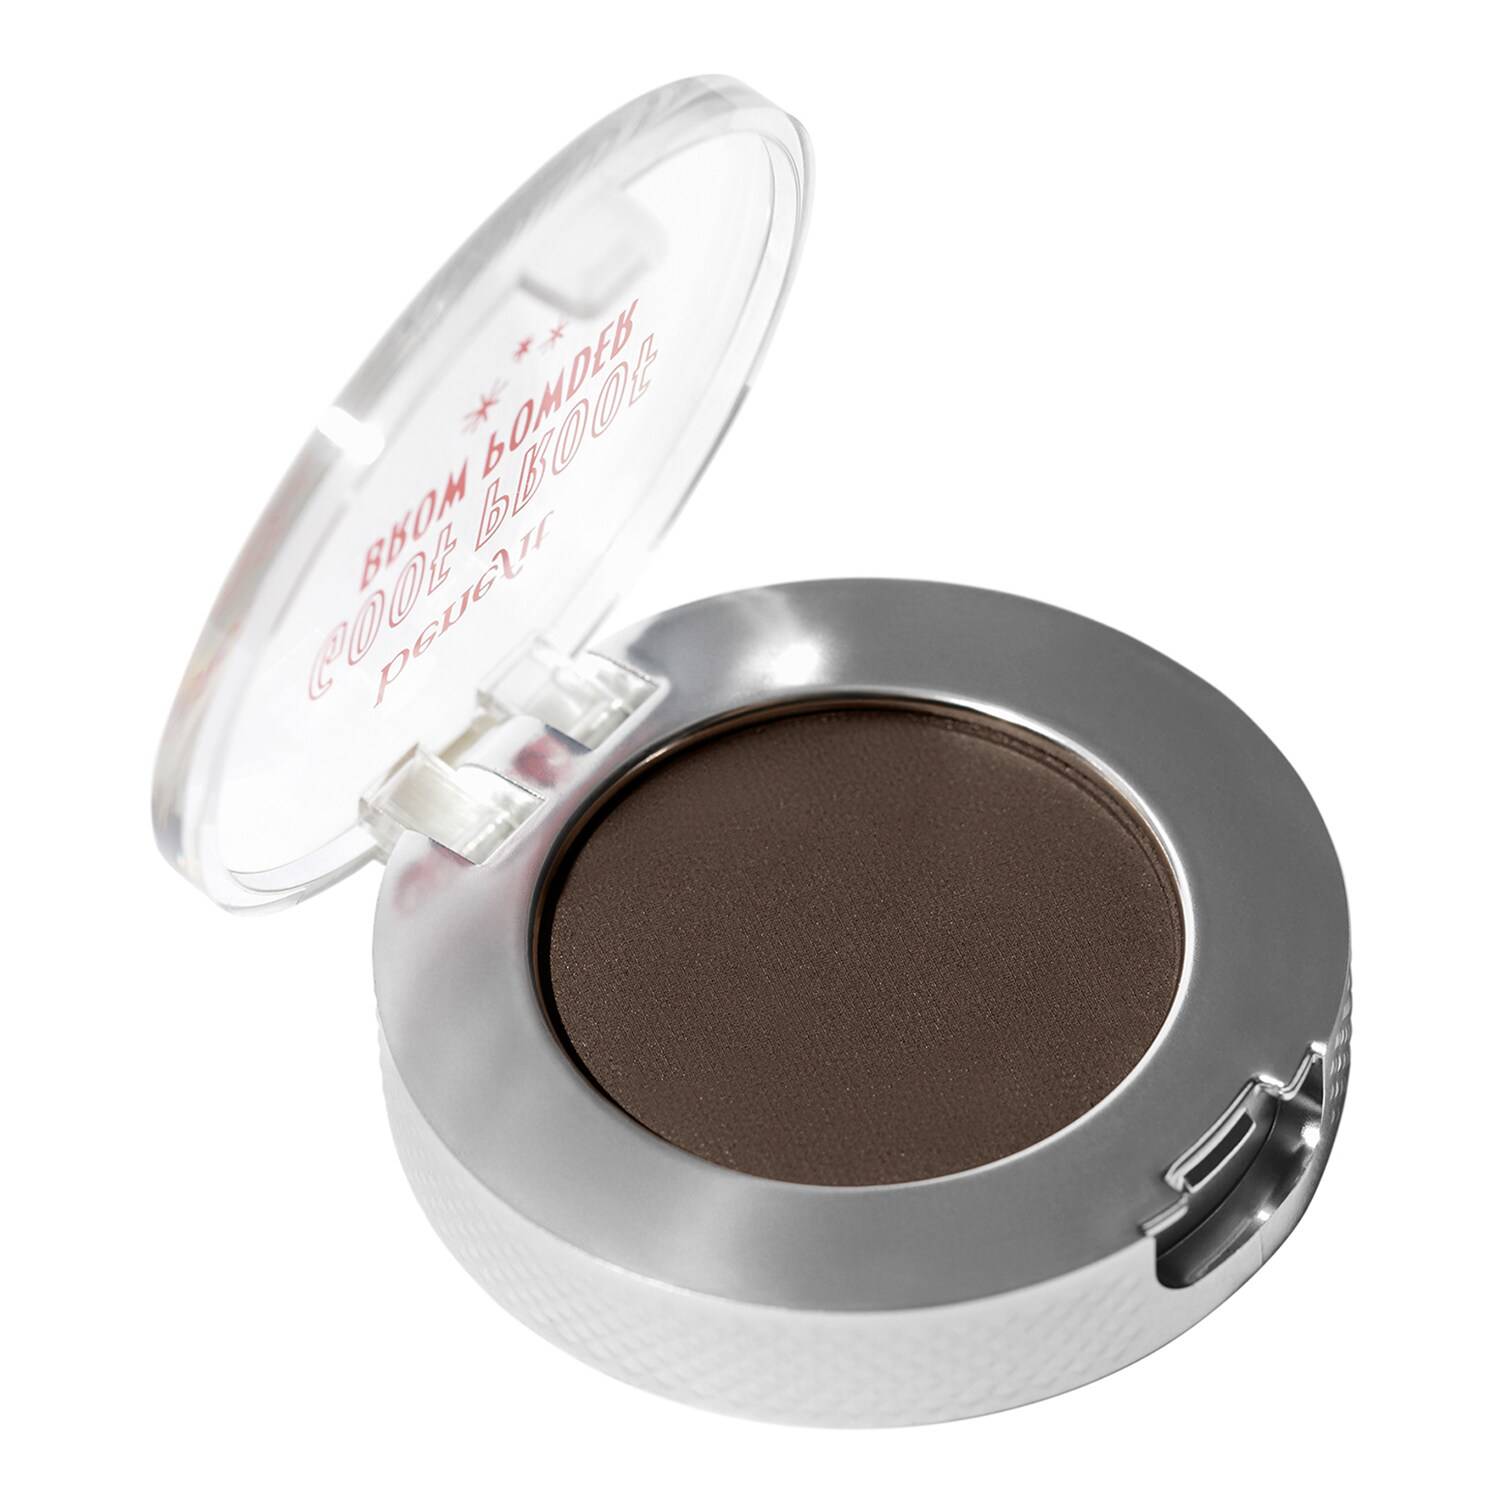 Benefit Cosmetics Goof Proof Easy Brow Filling Powder 1.9G 4.5 Neutral Deep Brown